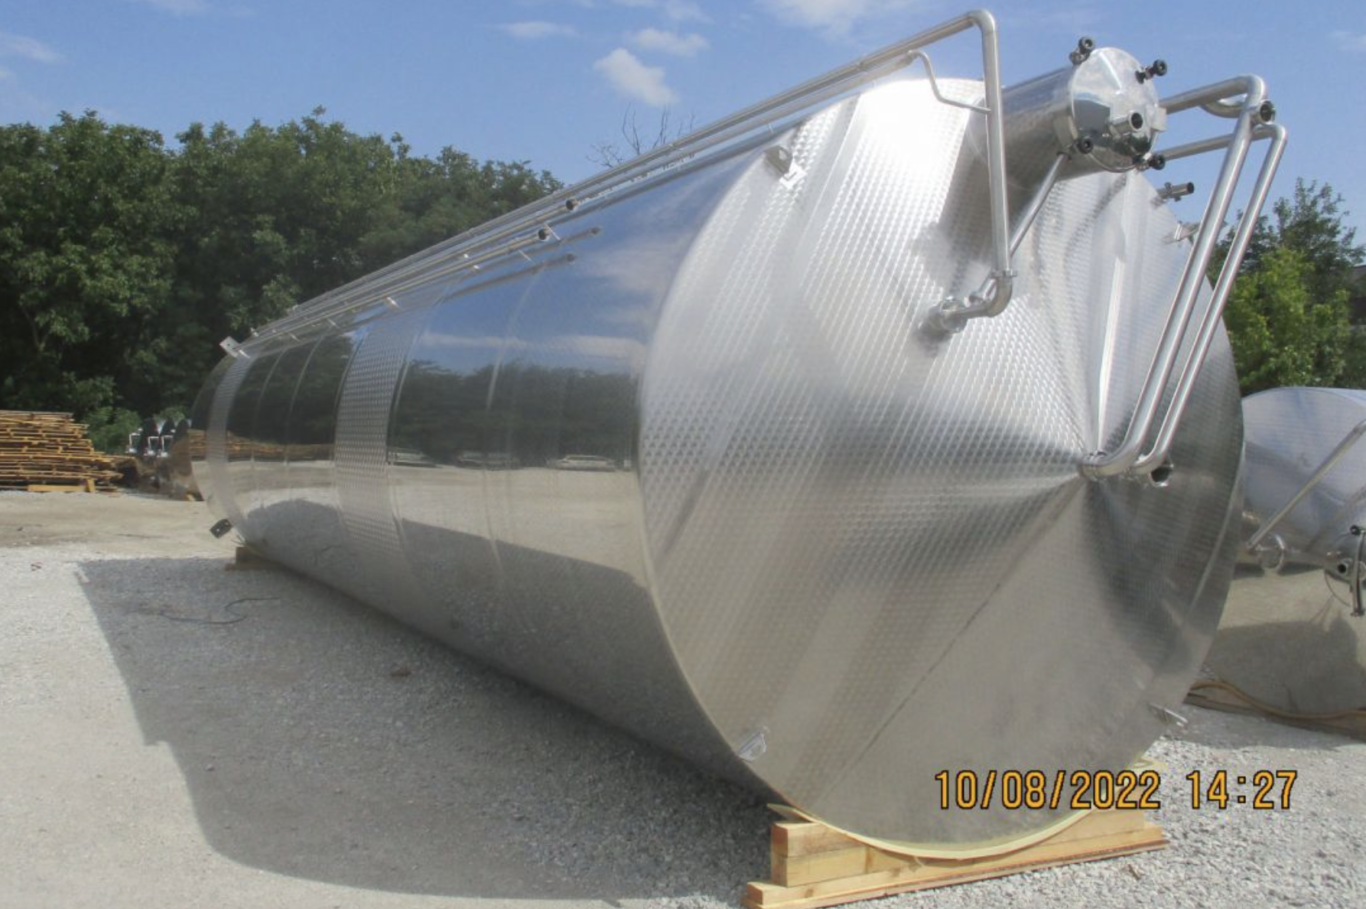 Stainless Steel Silos for Sale